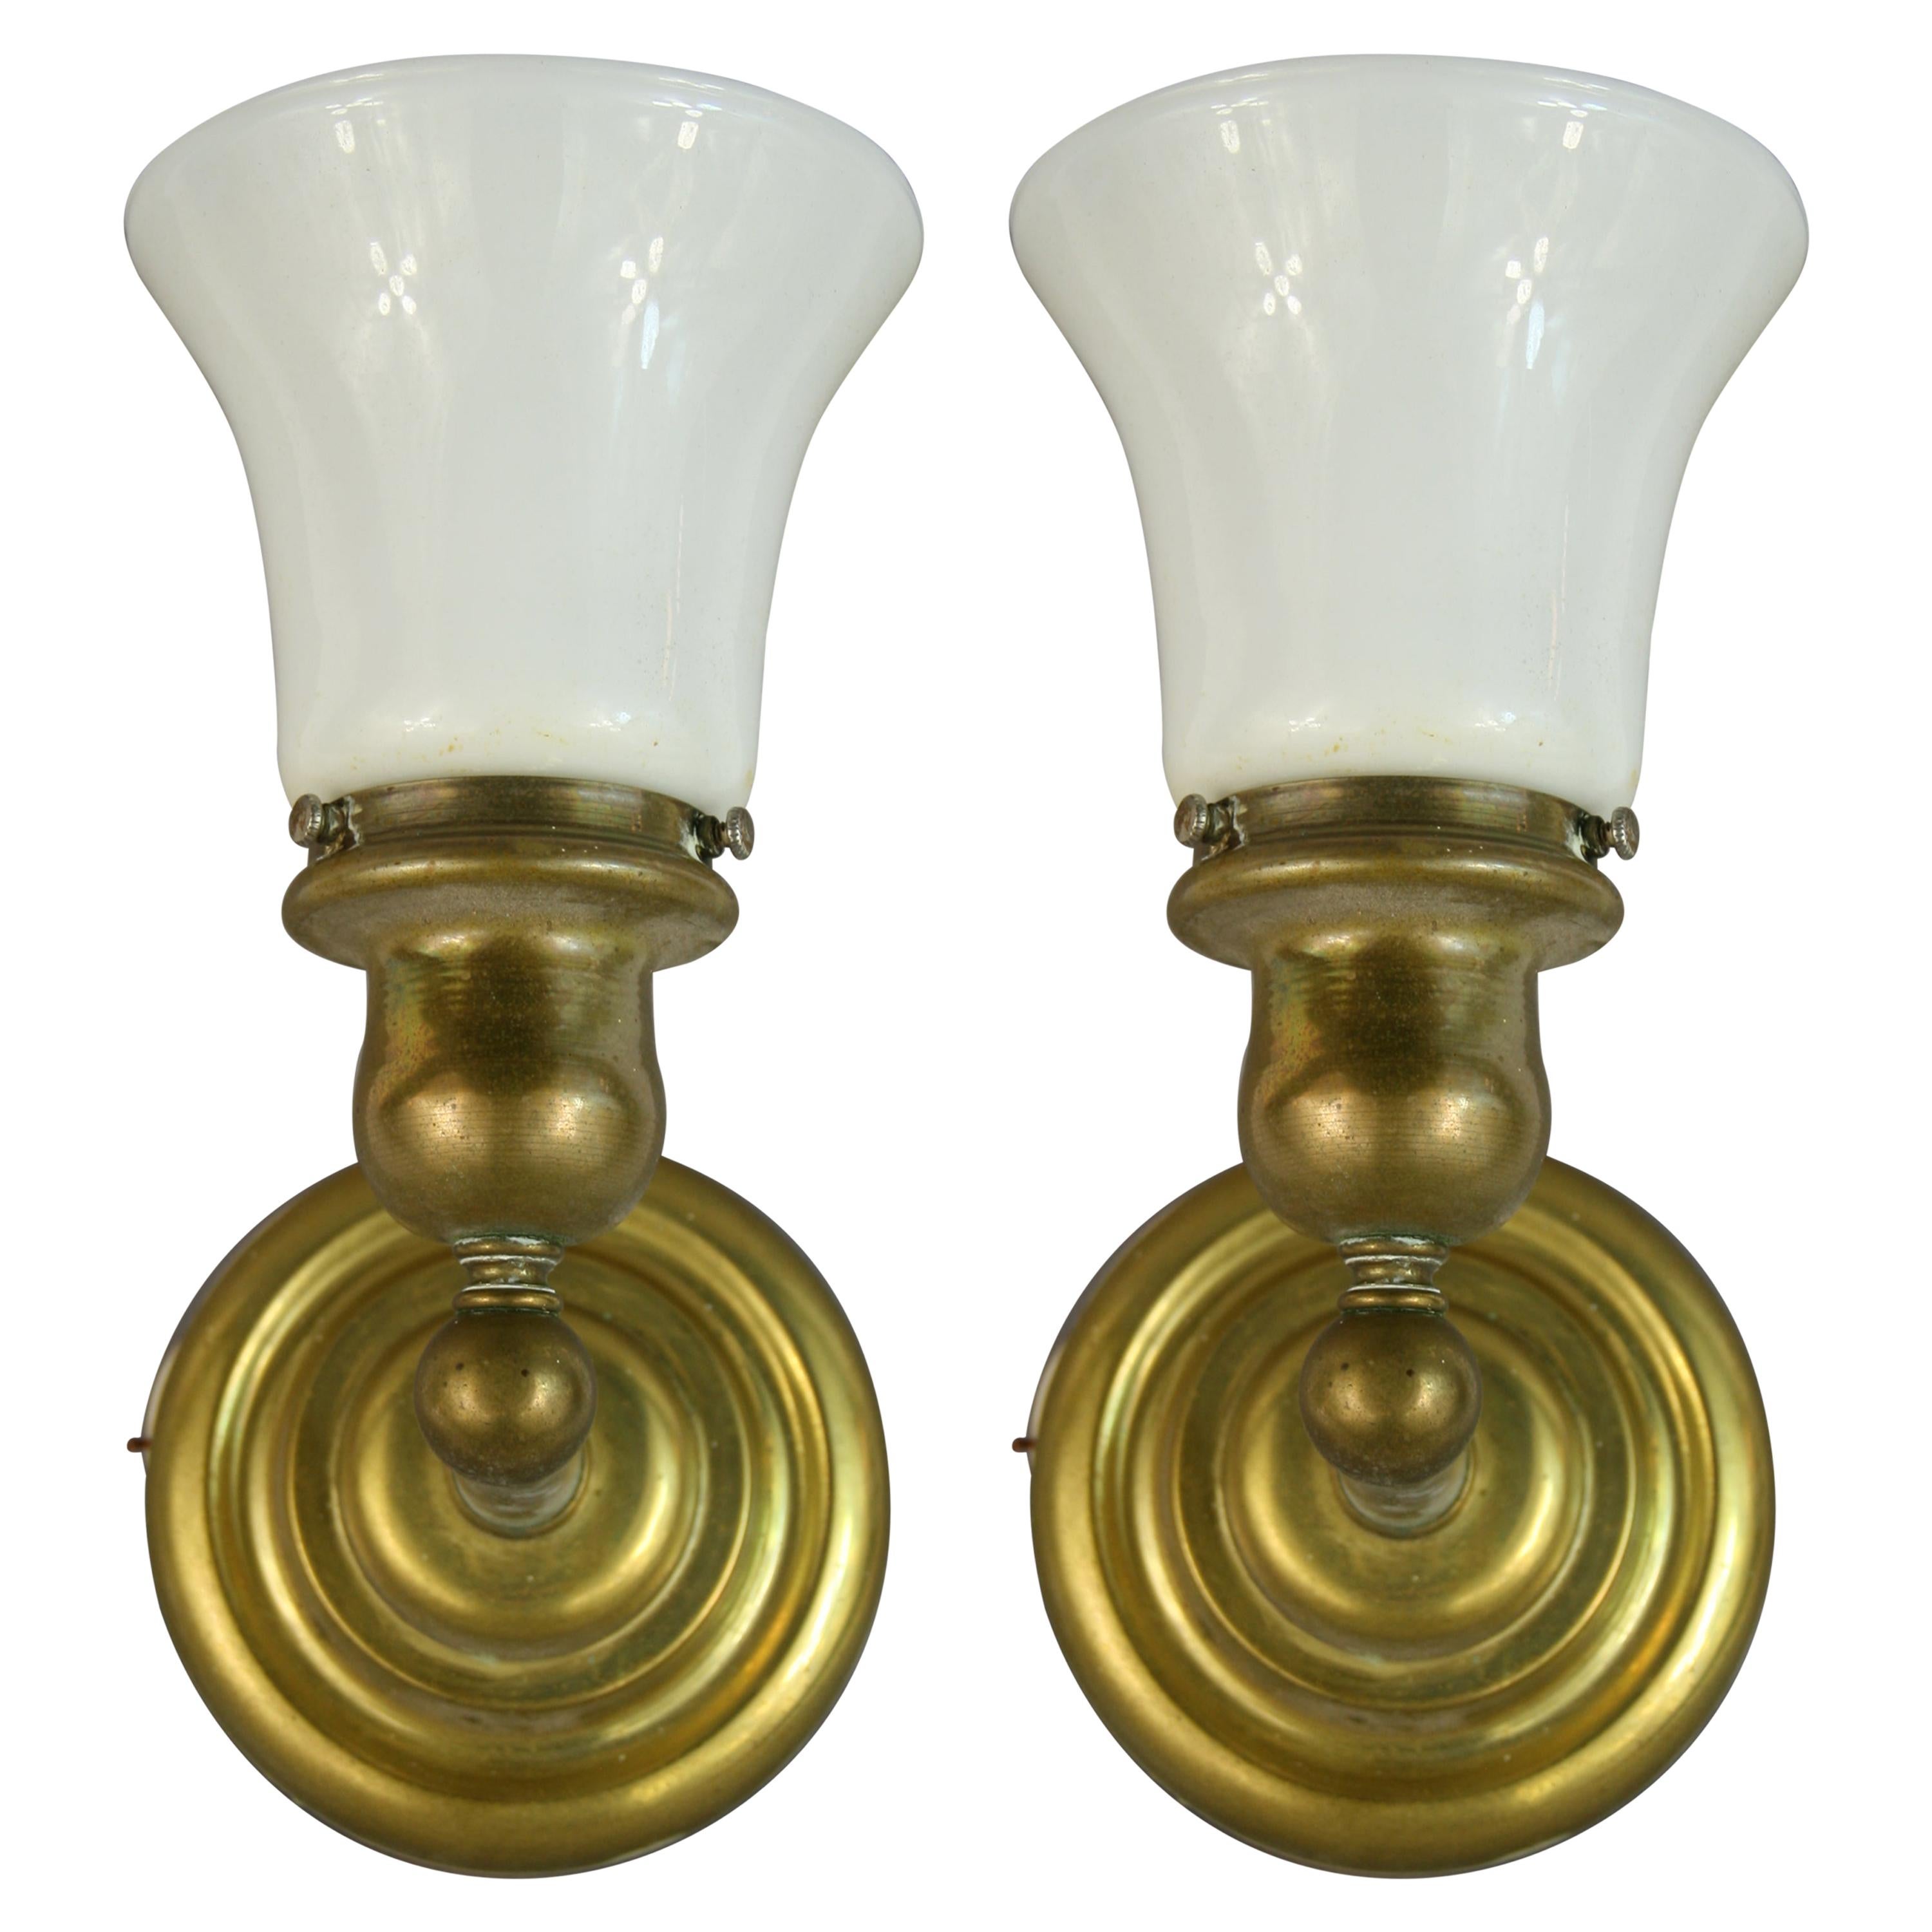 Pair of Brass Sconces with Opaline Glass Shade, circa 1940s